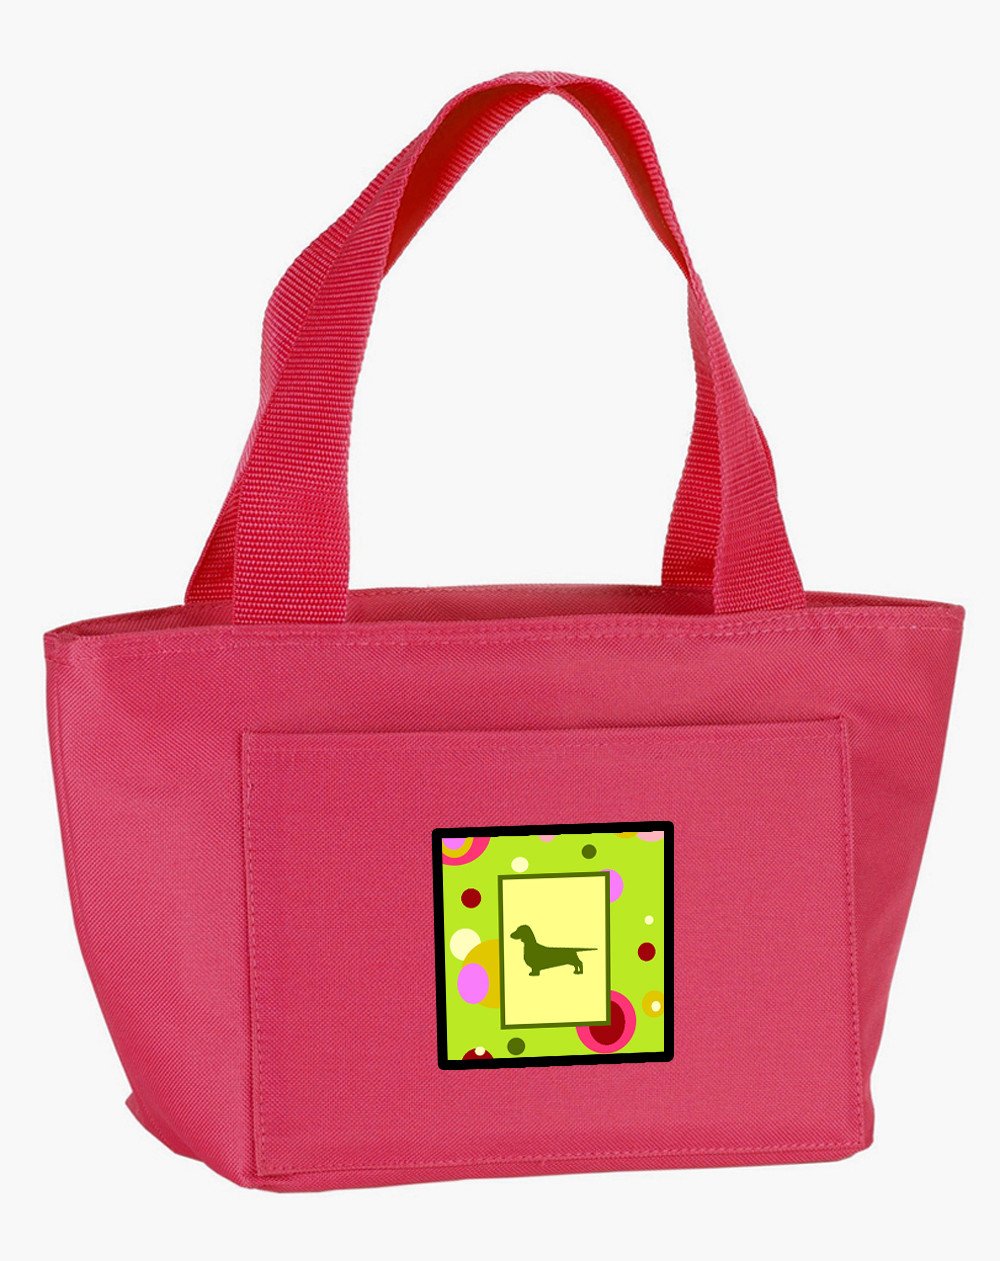 Lime Green Dots Dachshund Lunch Bag CK1024PK-8808 by Caroline's Treasures